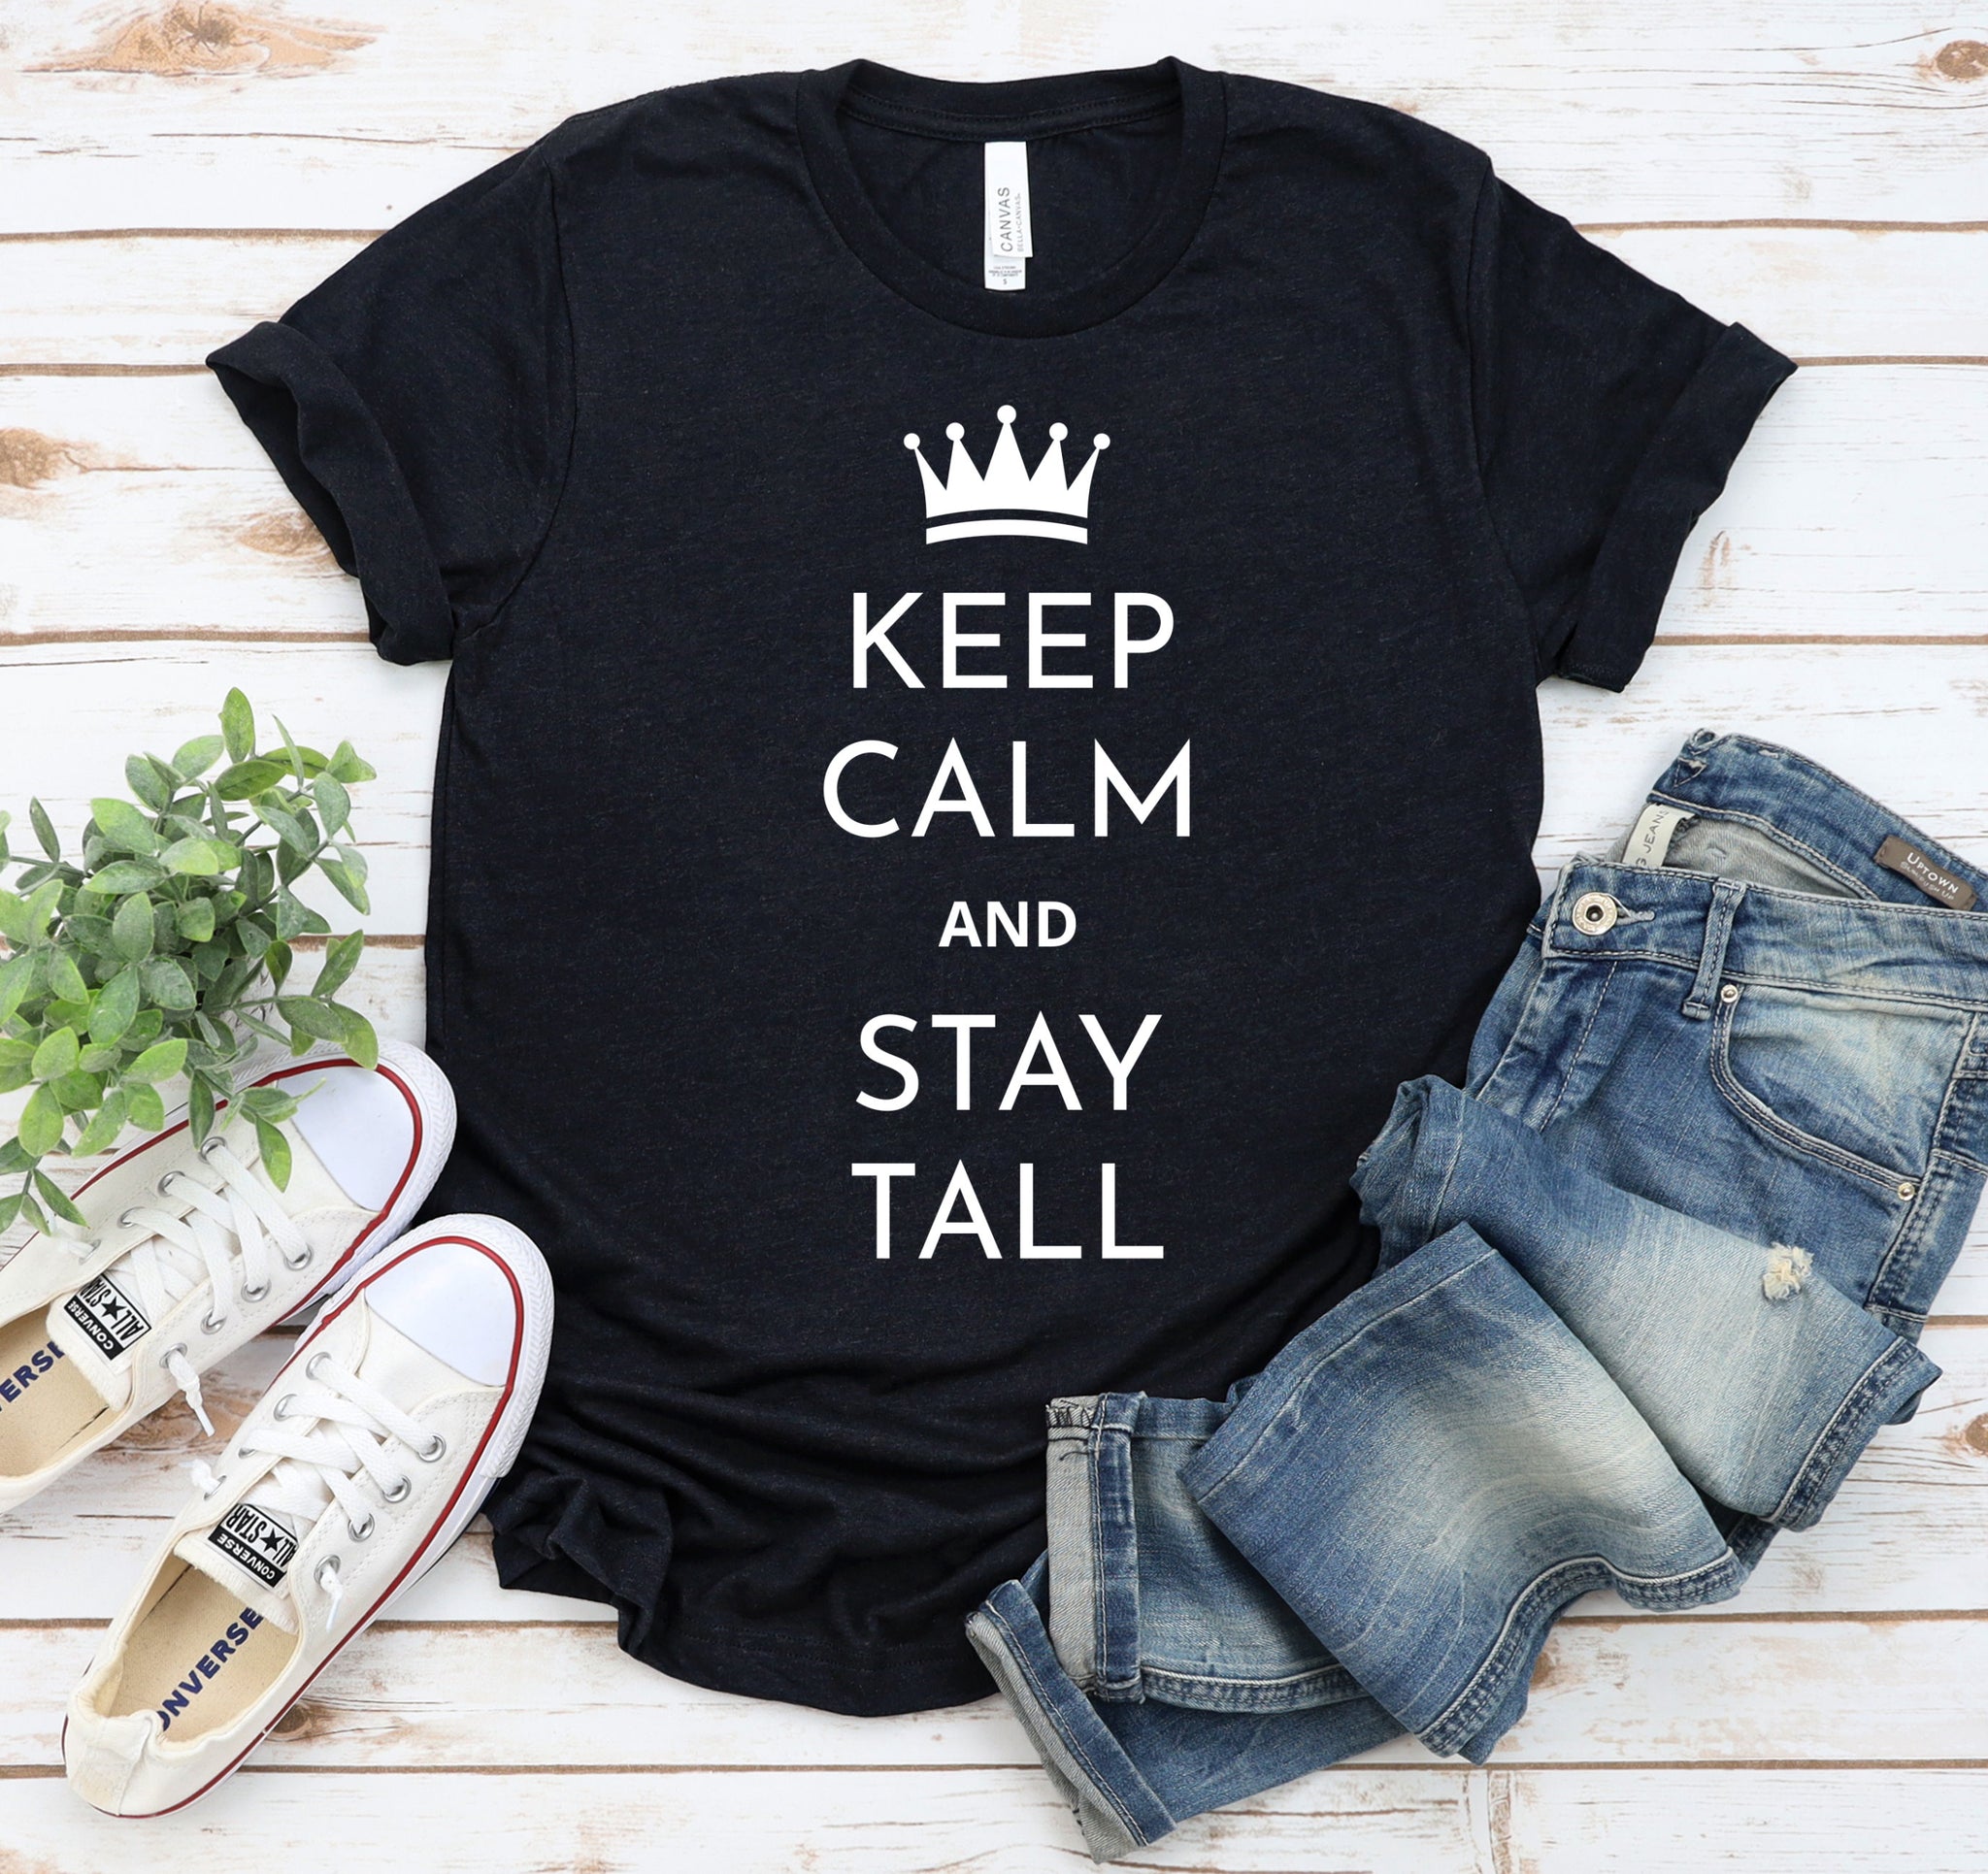 Soft graphic t-shirt with the words "Keep Calm and Stay Tall".